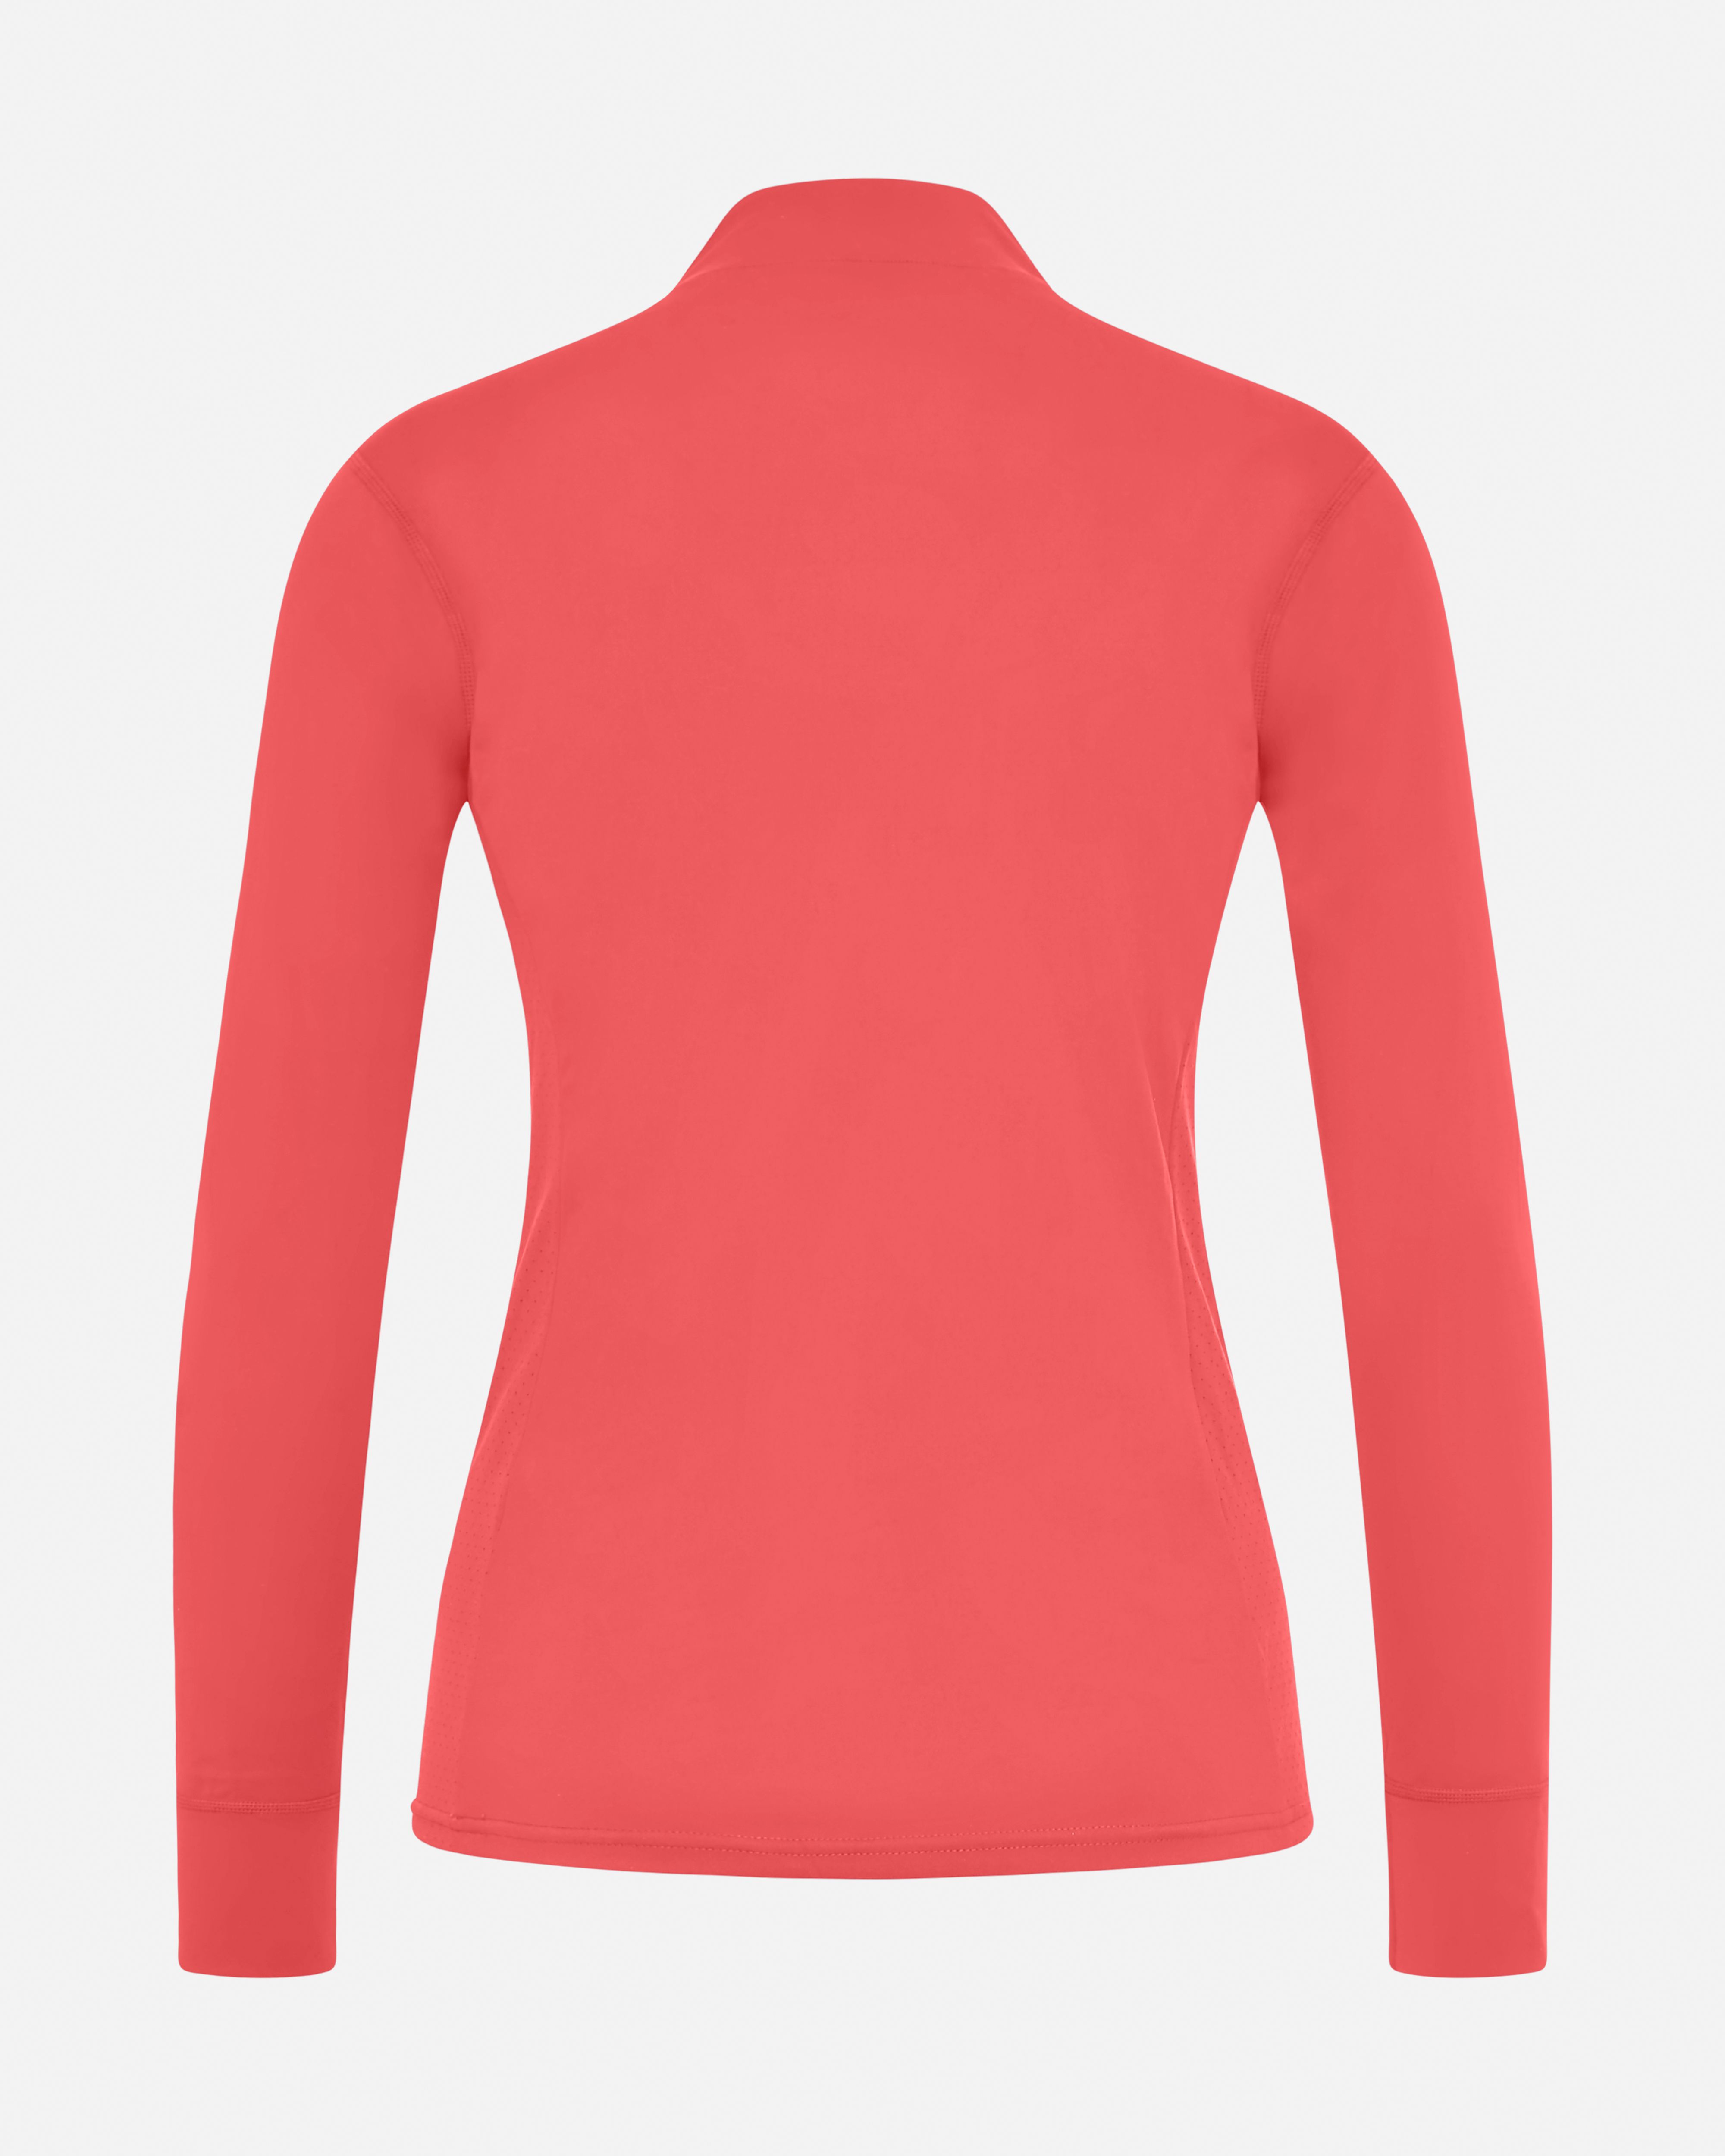 eaSt UV-Protection Shirt | Coral | 2XL